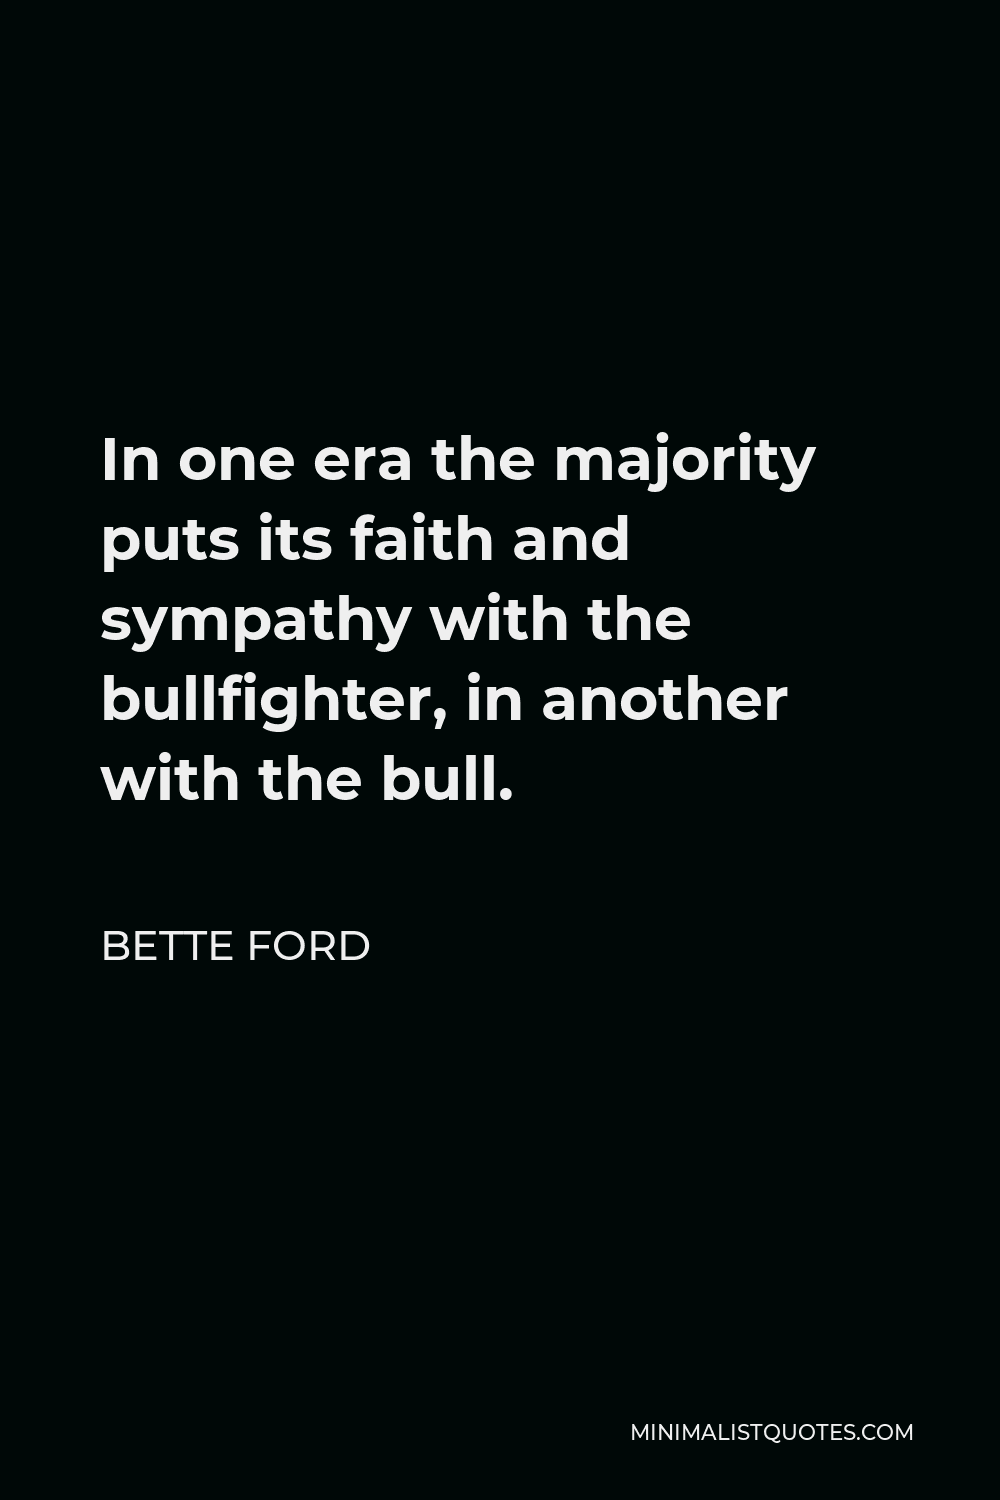 Bette Ford Quote - In one era the majority puts its faith and sympathy with the bullfighter, in another with the bull.